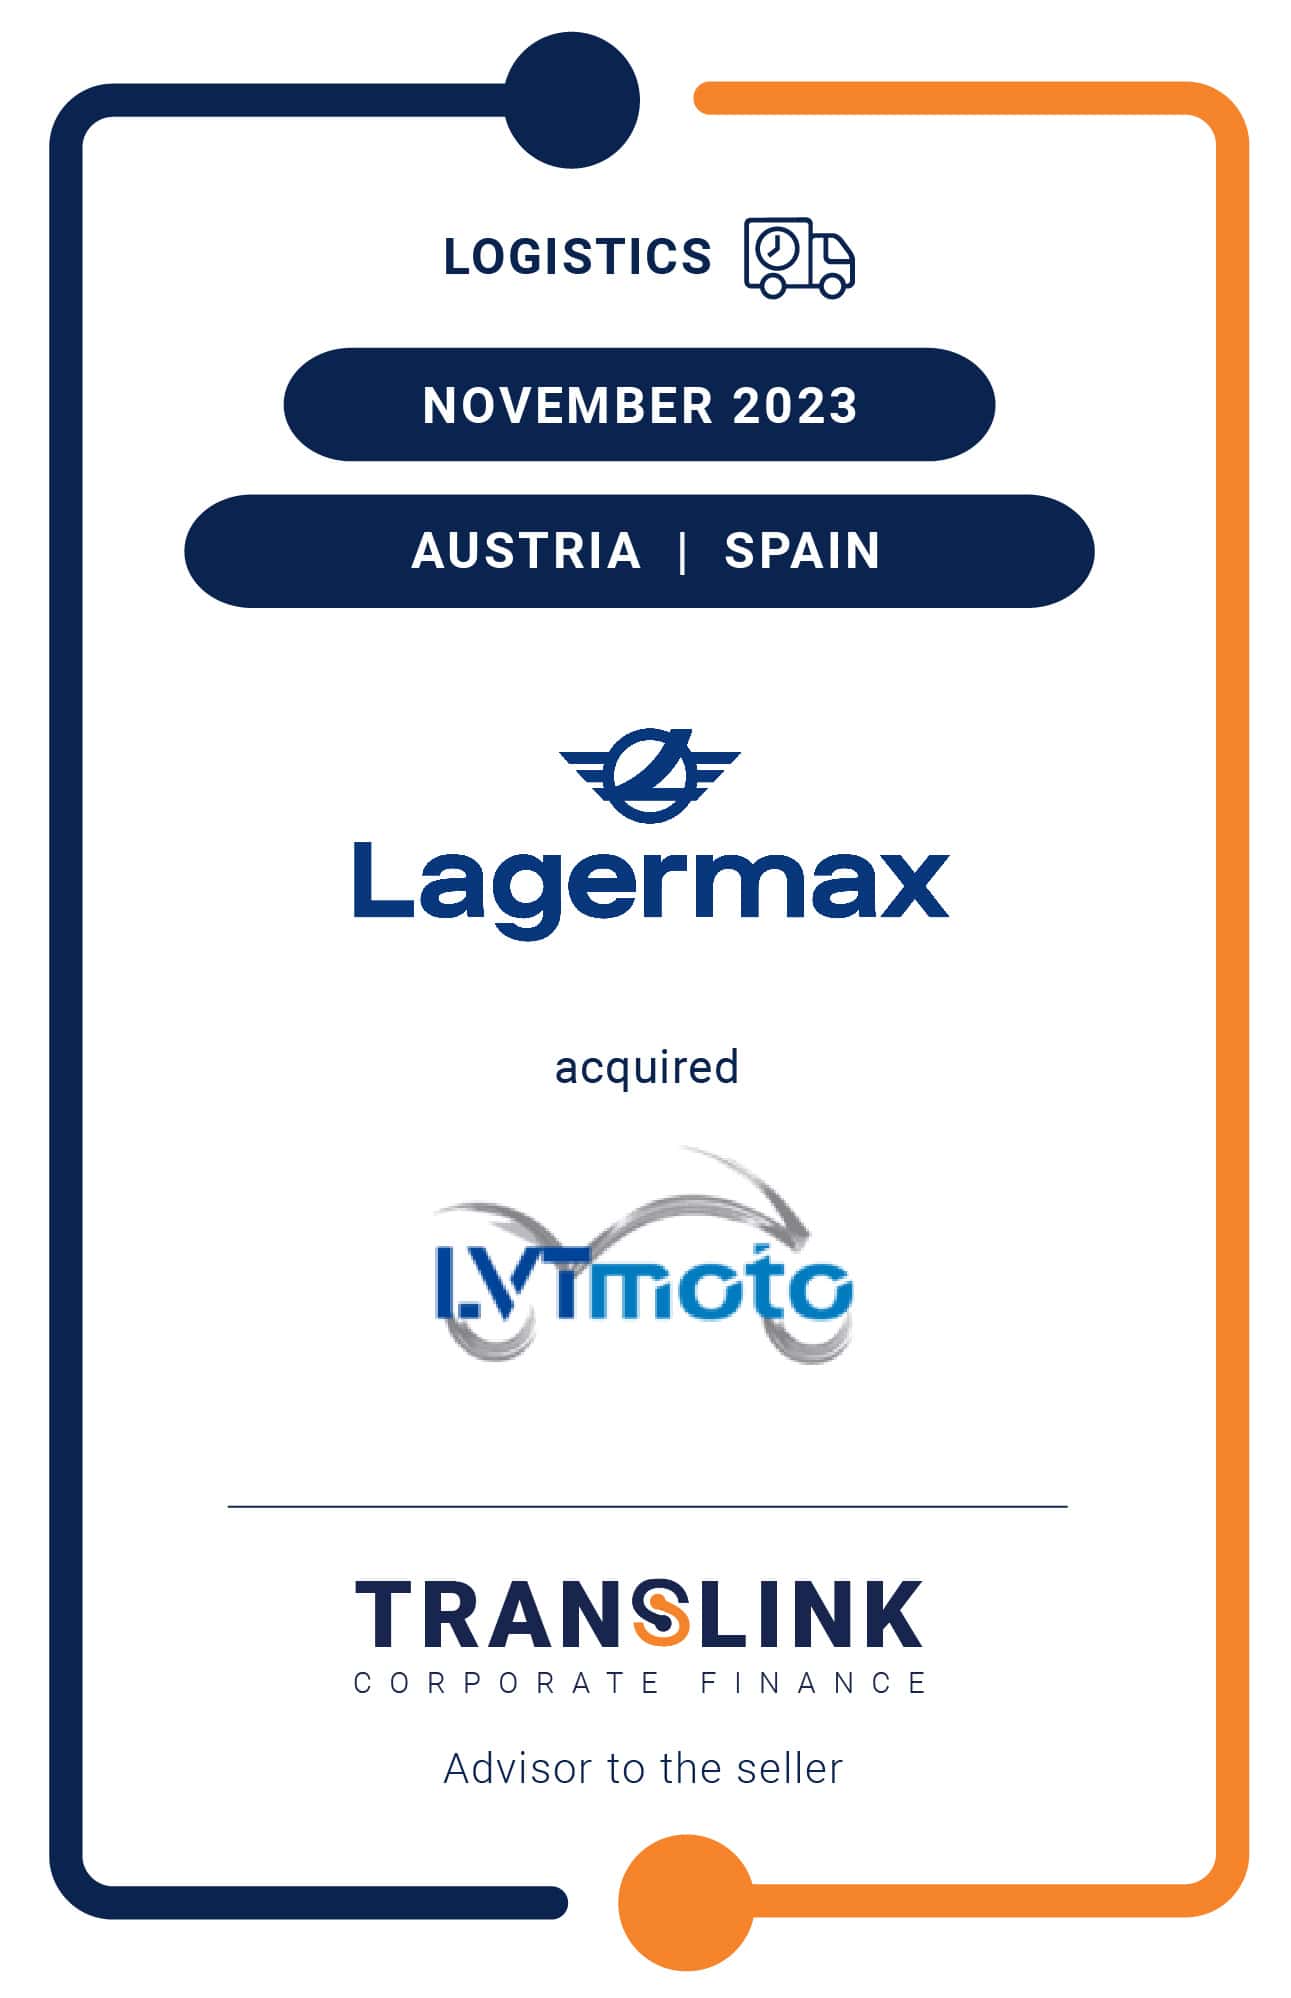 TRANSLINK CORPORATE FINANCE ACTED AS THE FINANCIAL ADVISOR TO LVT MOTO ON THE SALE TO LAGERMAX GROUP